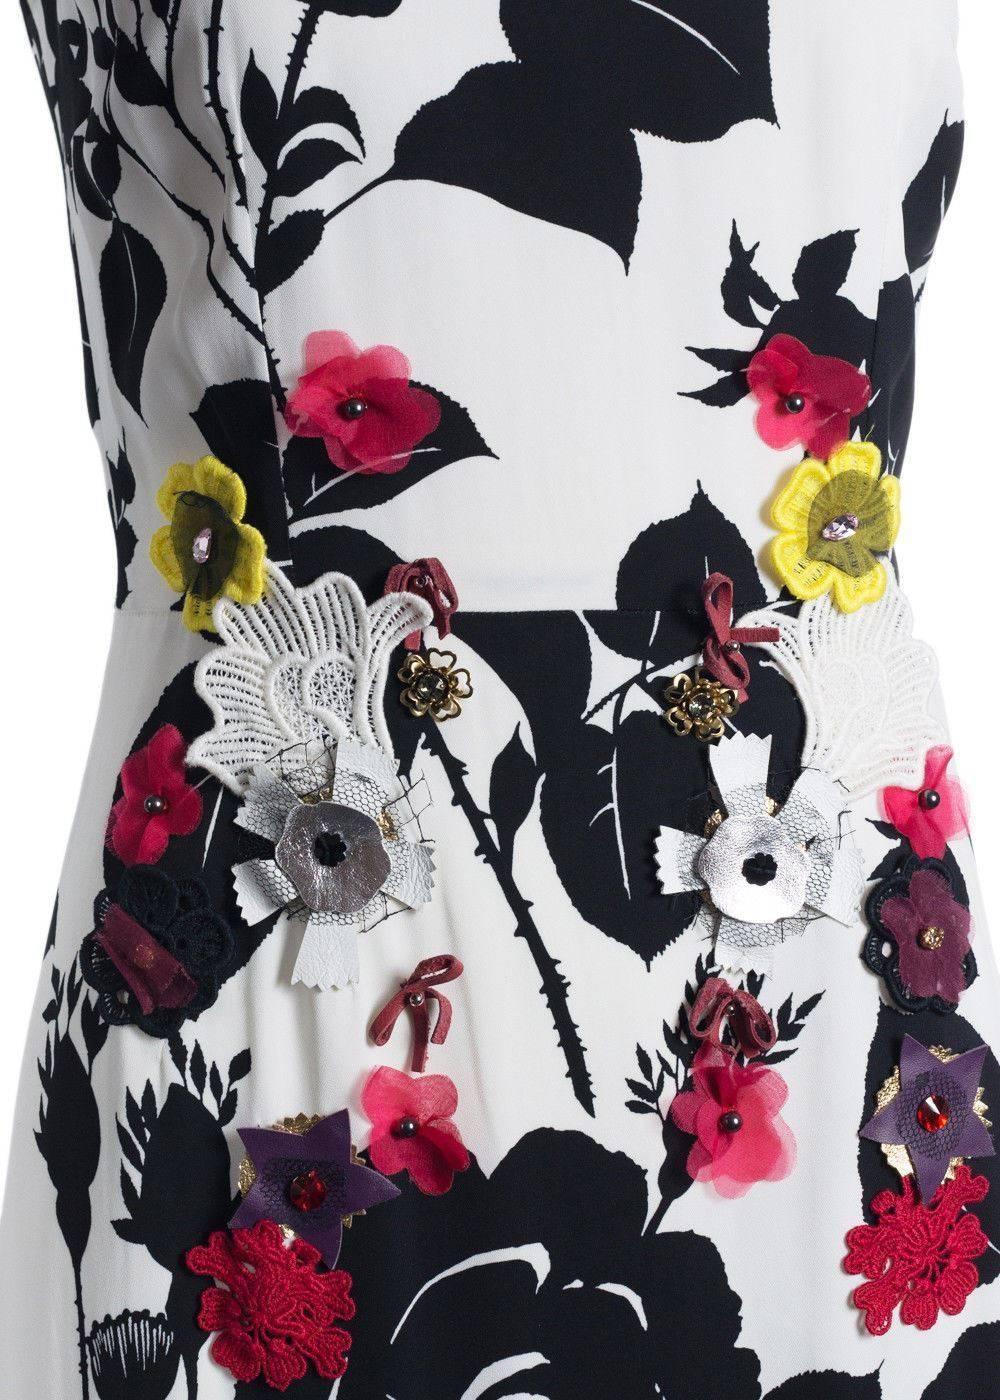 Brand New Dolce & Gabbana Women's Dress
Original Tags & Hanger Included
Retails in Stores & Online for $2895
Size IT44 / US8 Fits True to Size

Dolce & Gabbana's viscose blend floral sleeveless dress. This sleeveless designer dress features black